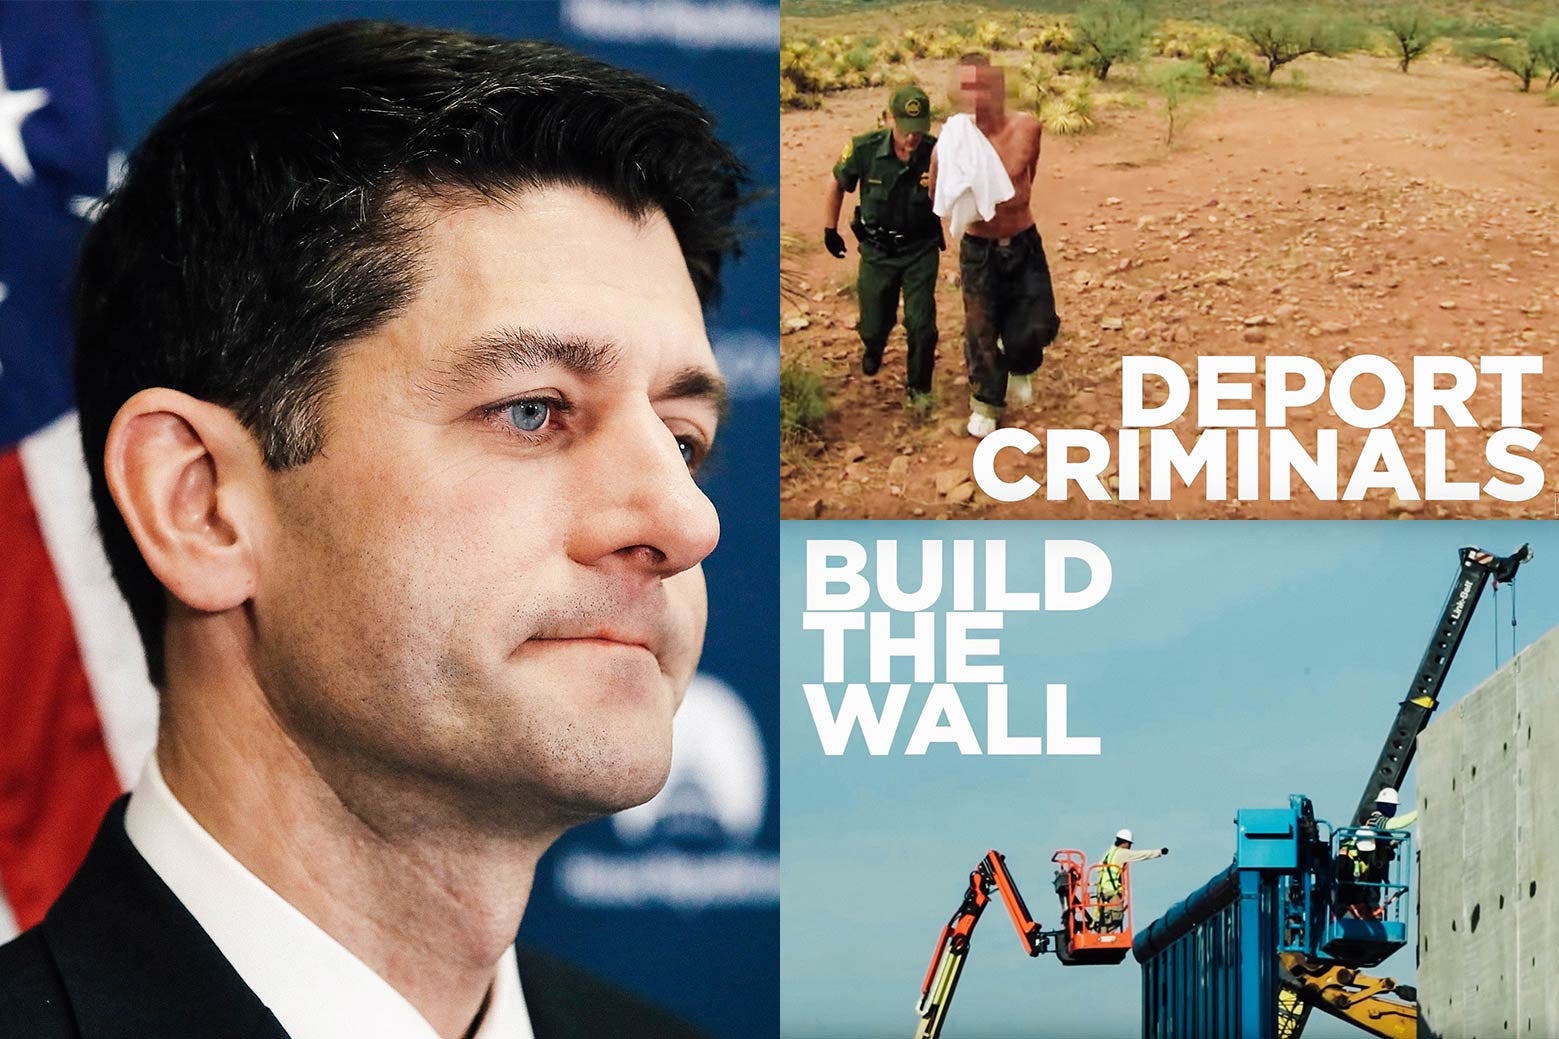 House Speaker Paul Ryan (R-WI) participates in his weekly news conference on Capitol Hill December 5, 2017 in Washington, DC, and two stills from a Trump campaign ad, "BUILD THE WALL" and "DEPORT CRIMINALS".